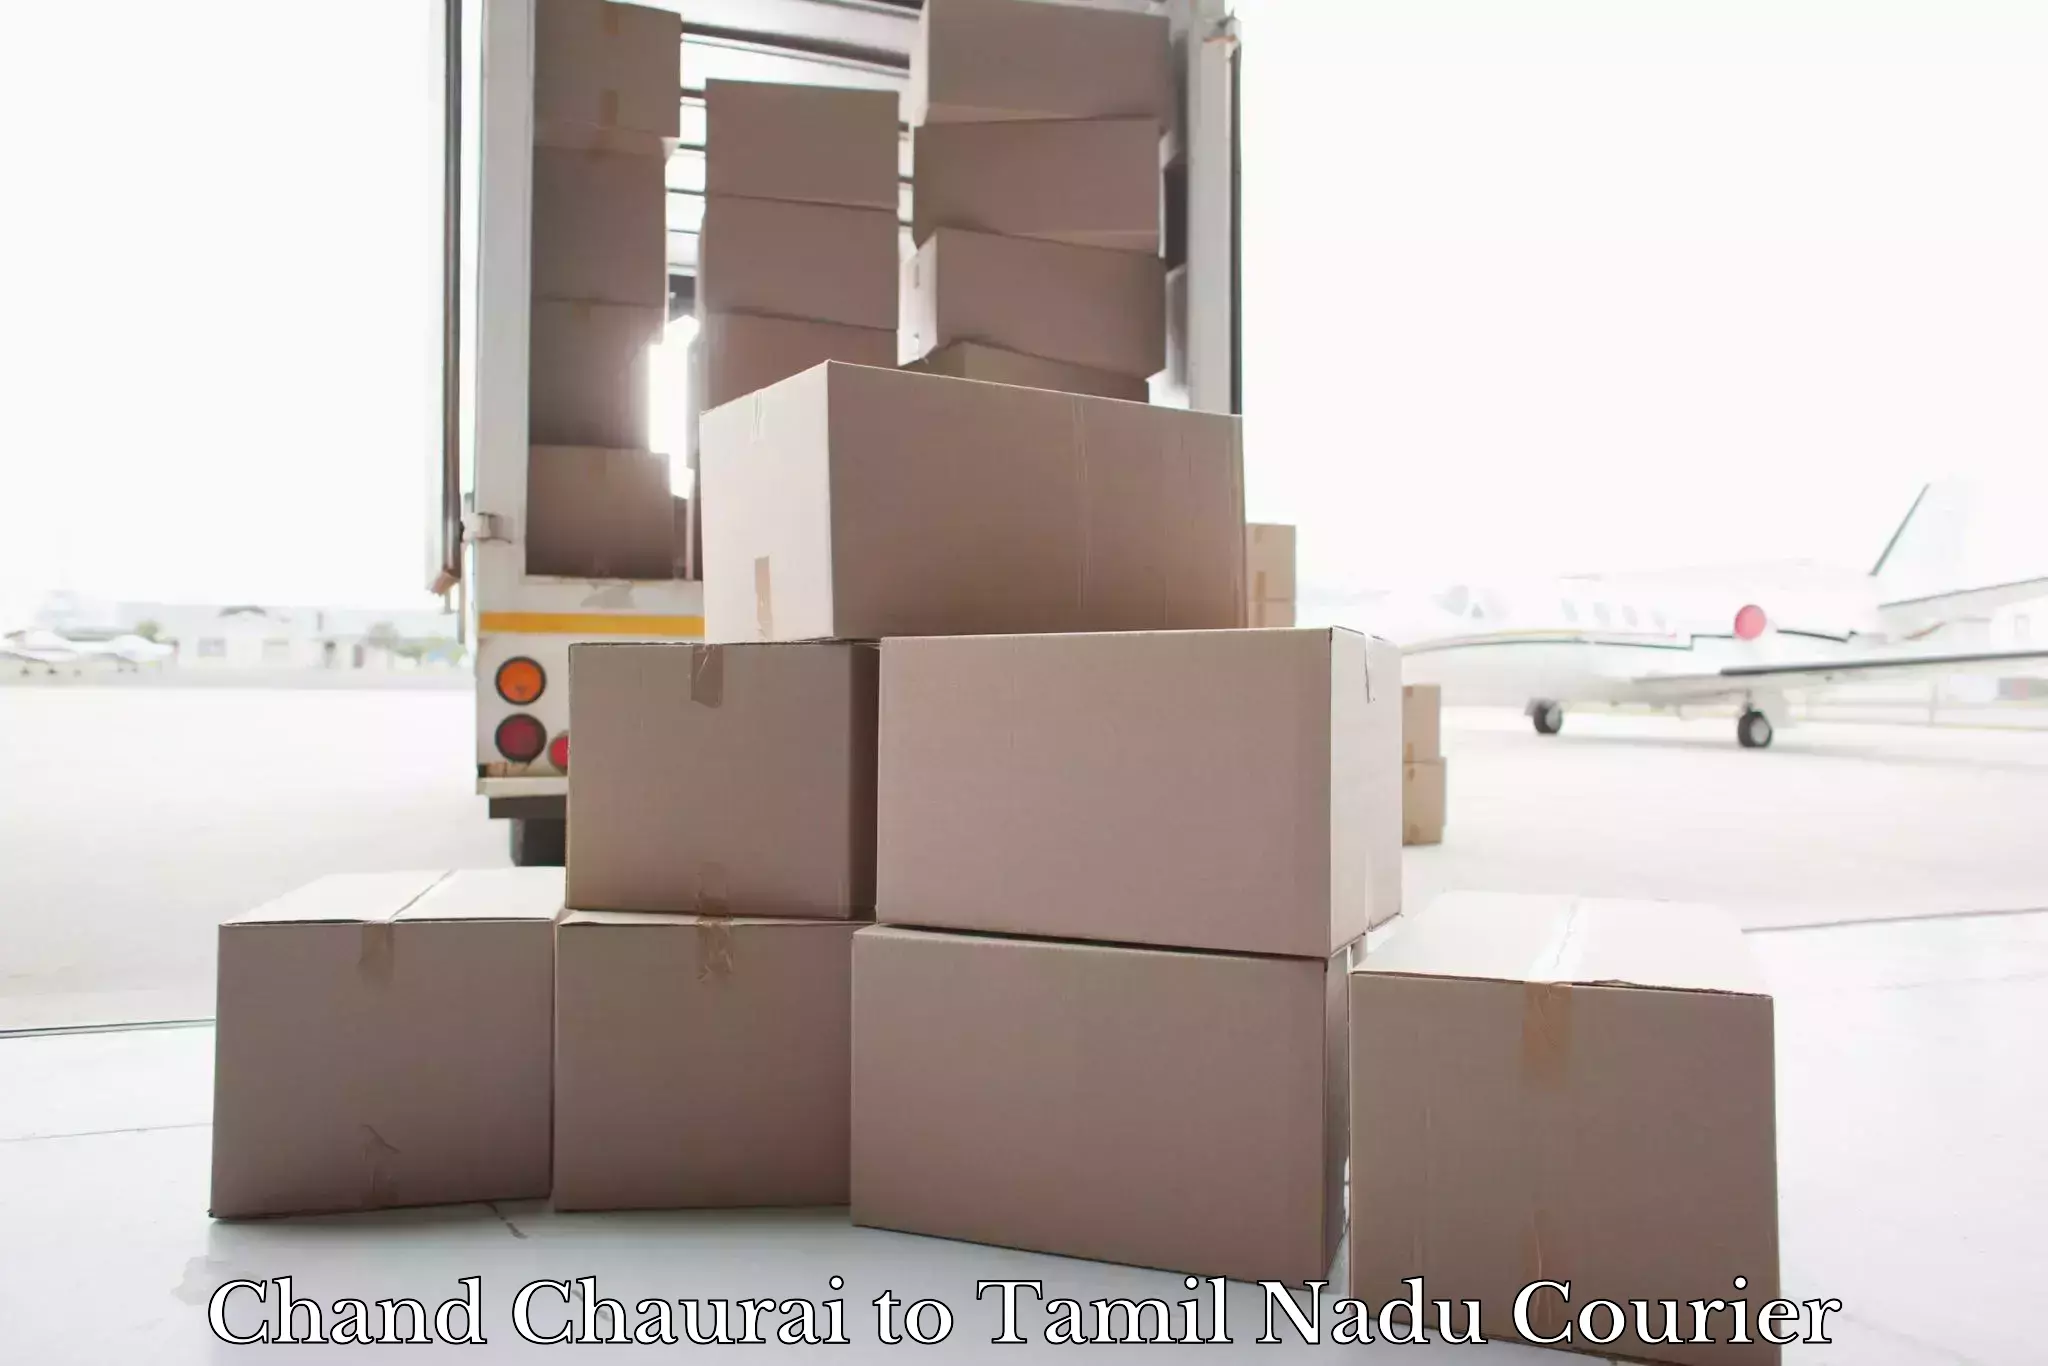 Luggage delivery system Chand Chaurai to The Gandhigram Rural Institute